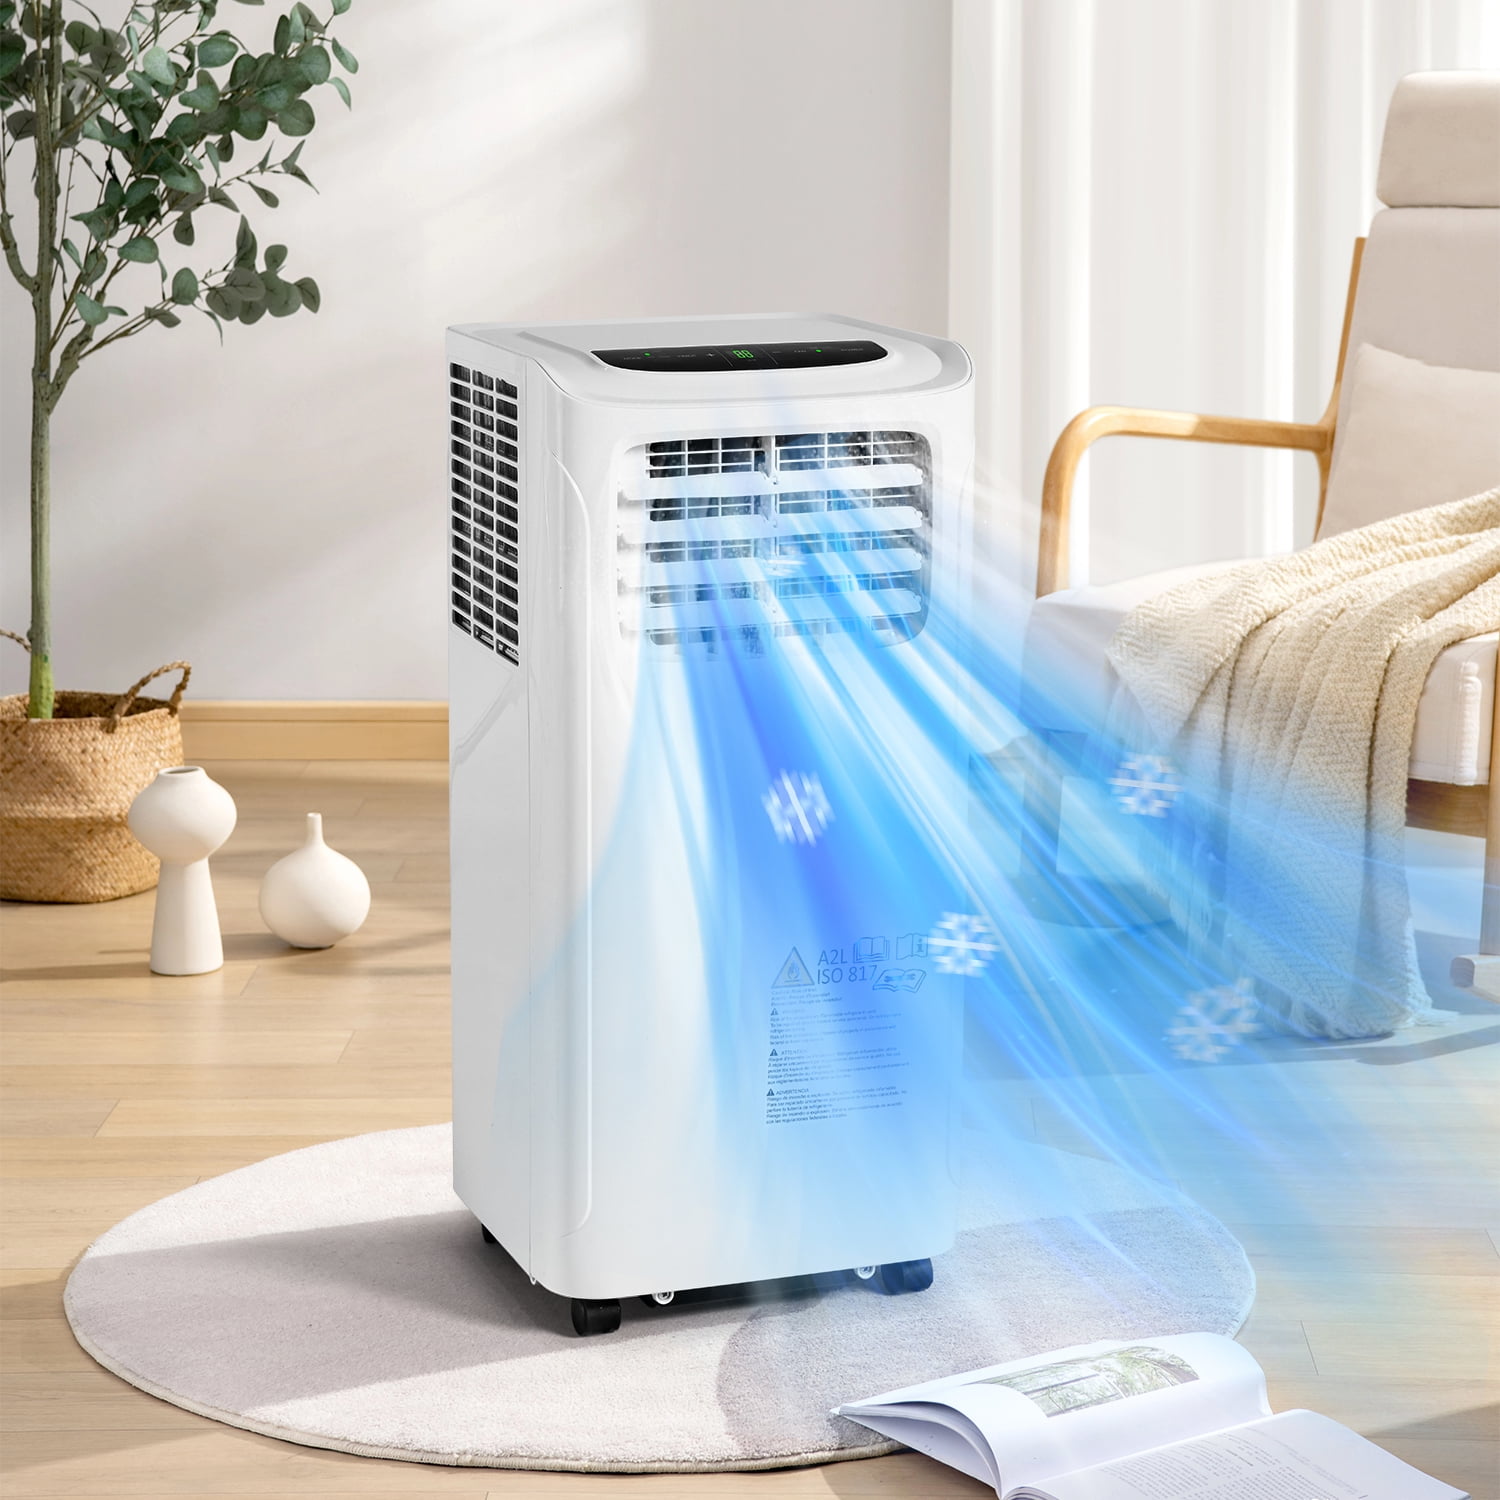 Hobart Fantastiske Barmhjertige Sonegra Air Conditioner, 8000 BTU Portable Air Conditioner with 3-in-1  Function, Remote Control & LED Display, Portable AC Unit No Window Needed  for Indoor Room, Office, Bedroom, Freeing Standing, Whi - Walmart.com